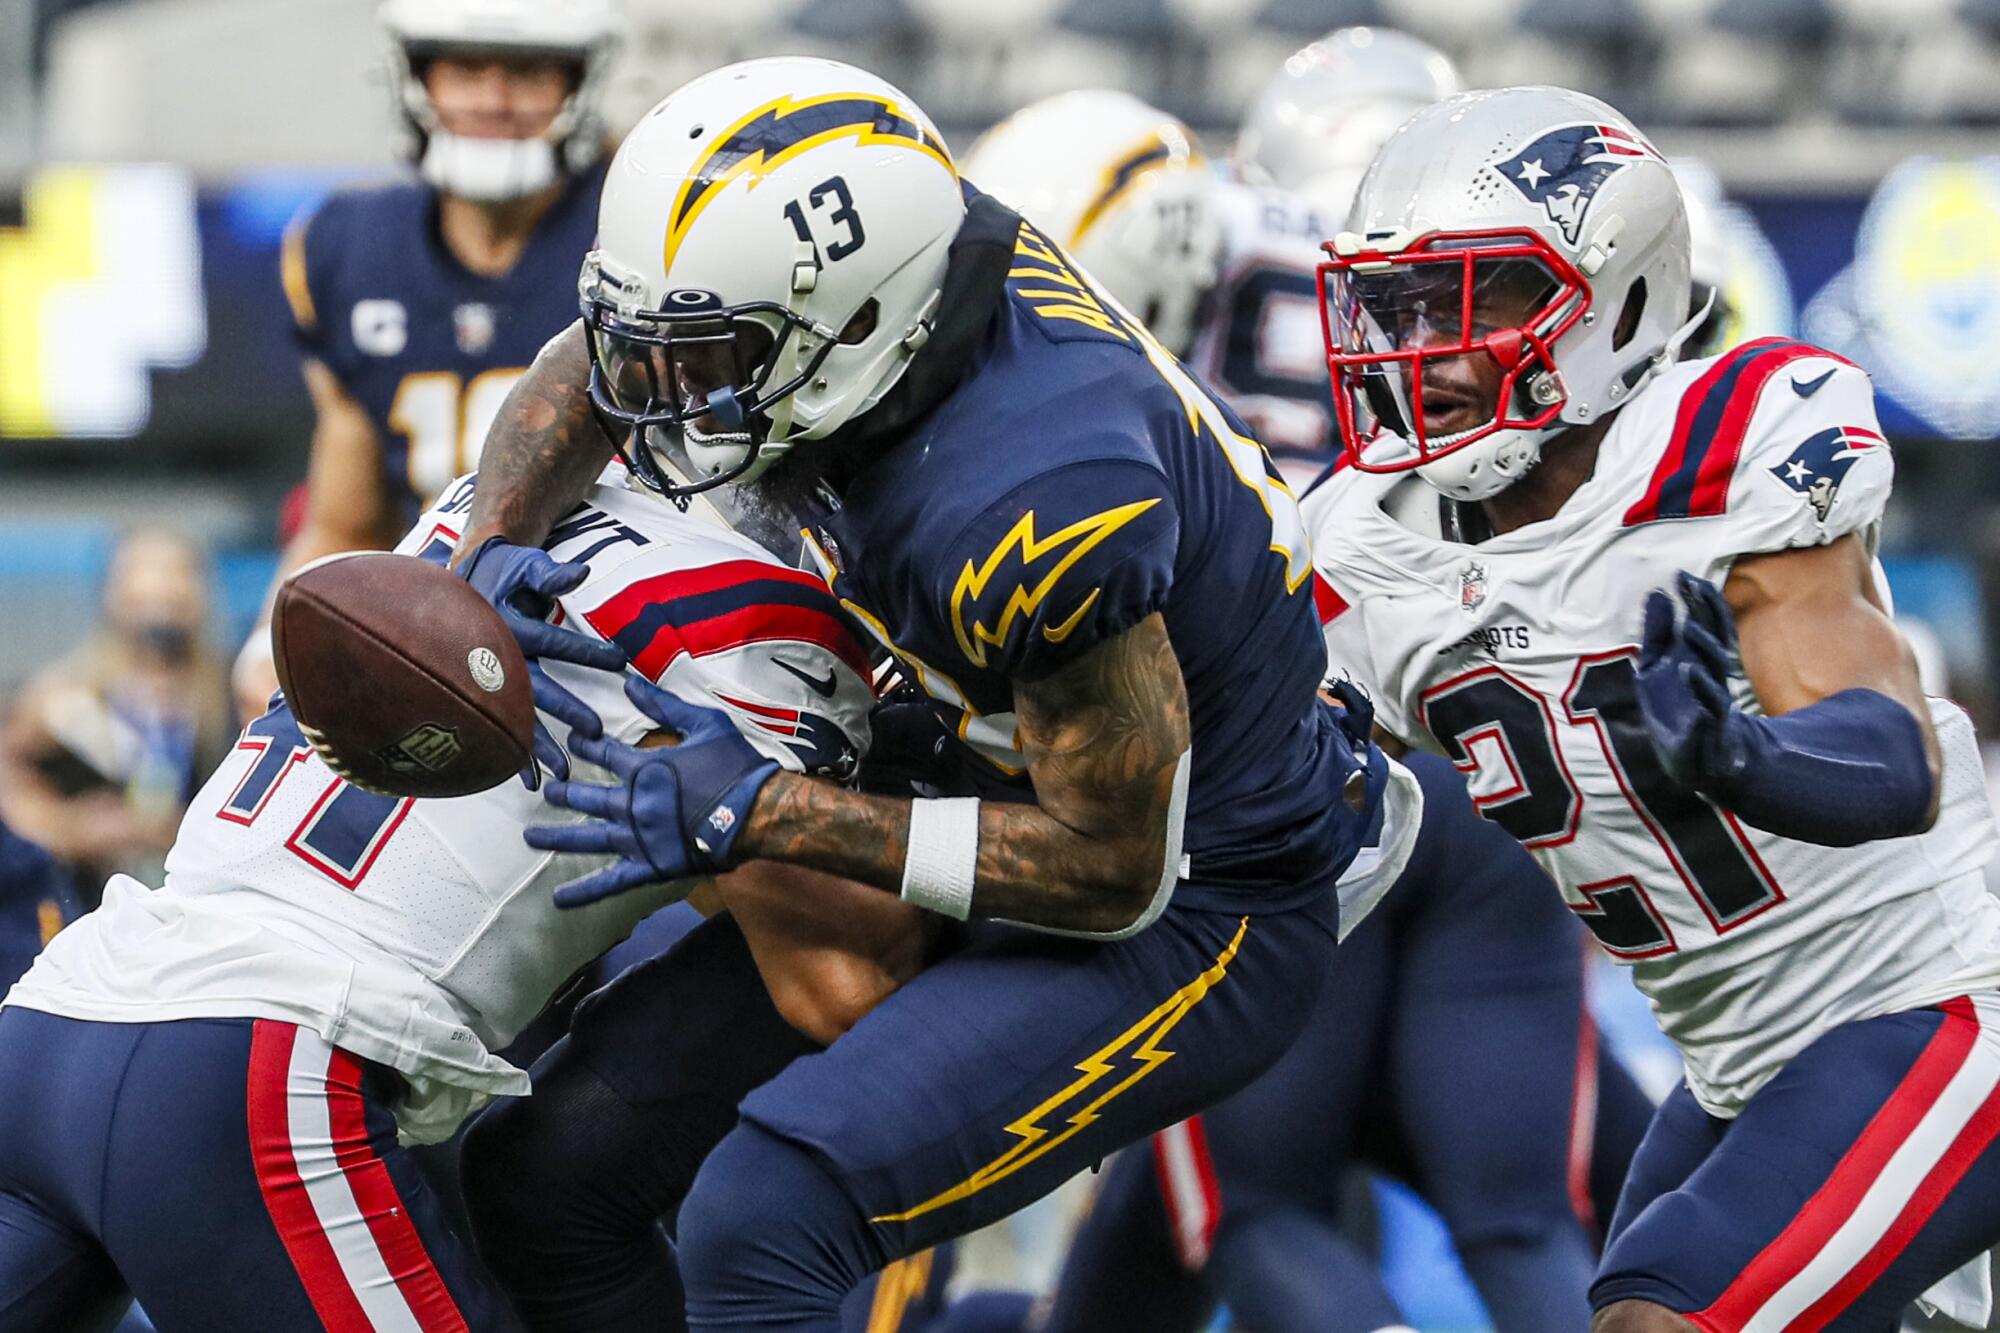 Chargers wide receiver Keenan Allen can't make a catch as he's hit by New England Patriots cornerback Myles Bryant.